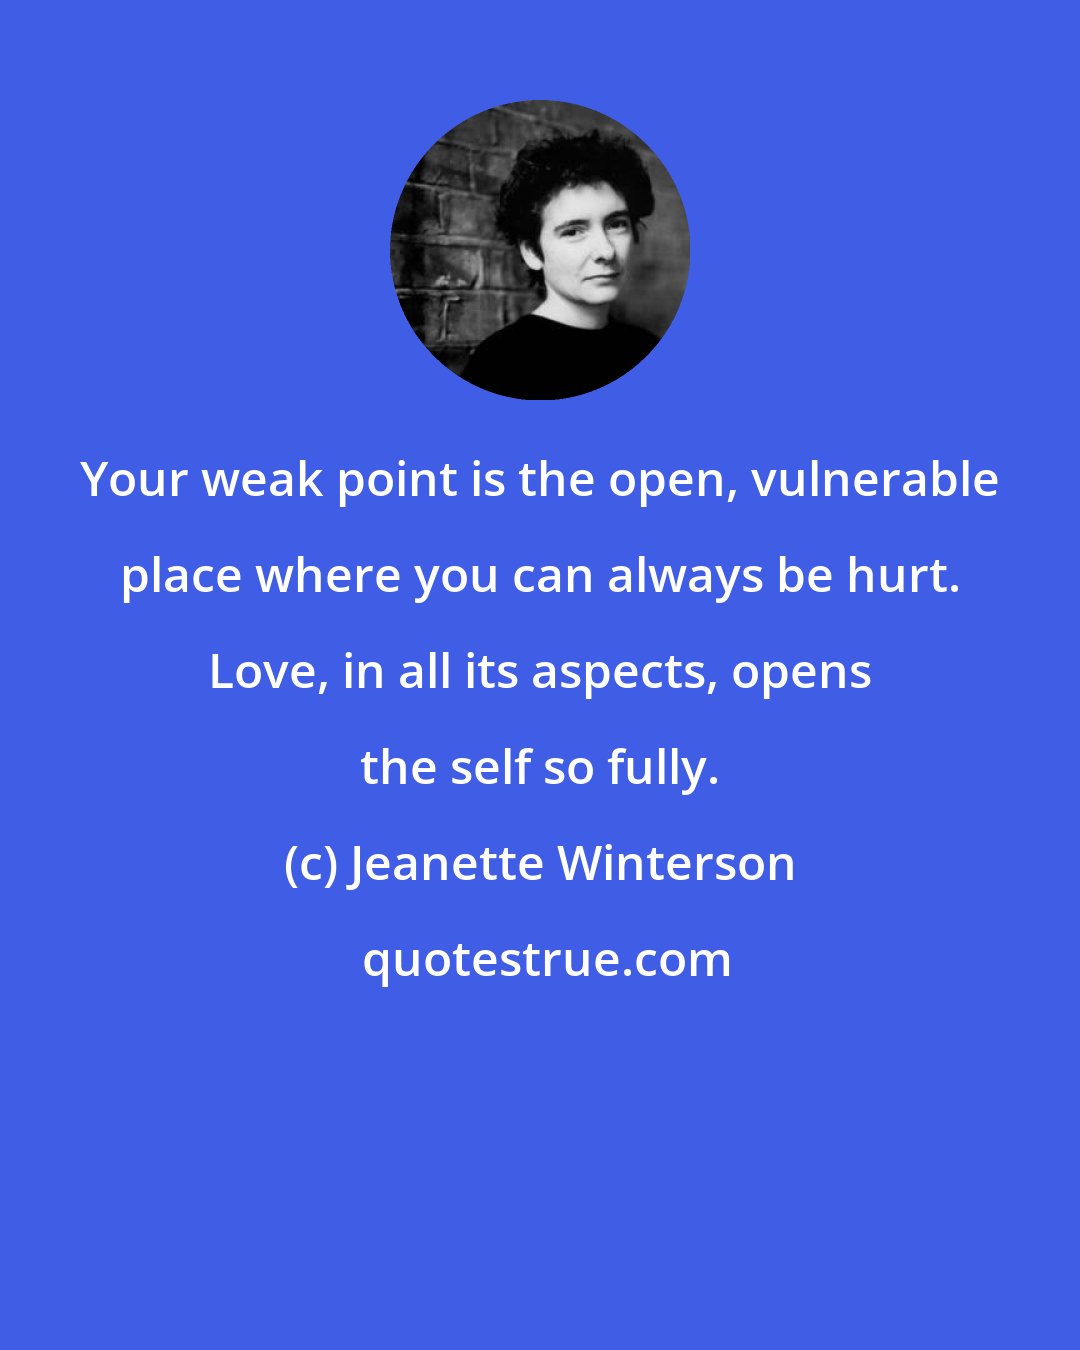 Jeanette Winterson: Your weak point is the open, vulnerable place where you can always be hurt. Love, in all its aspects, opens the self so fully.